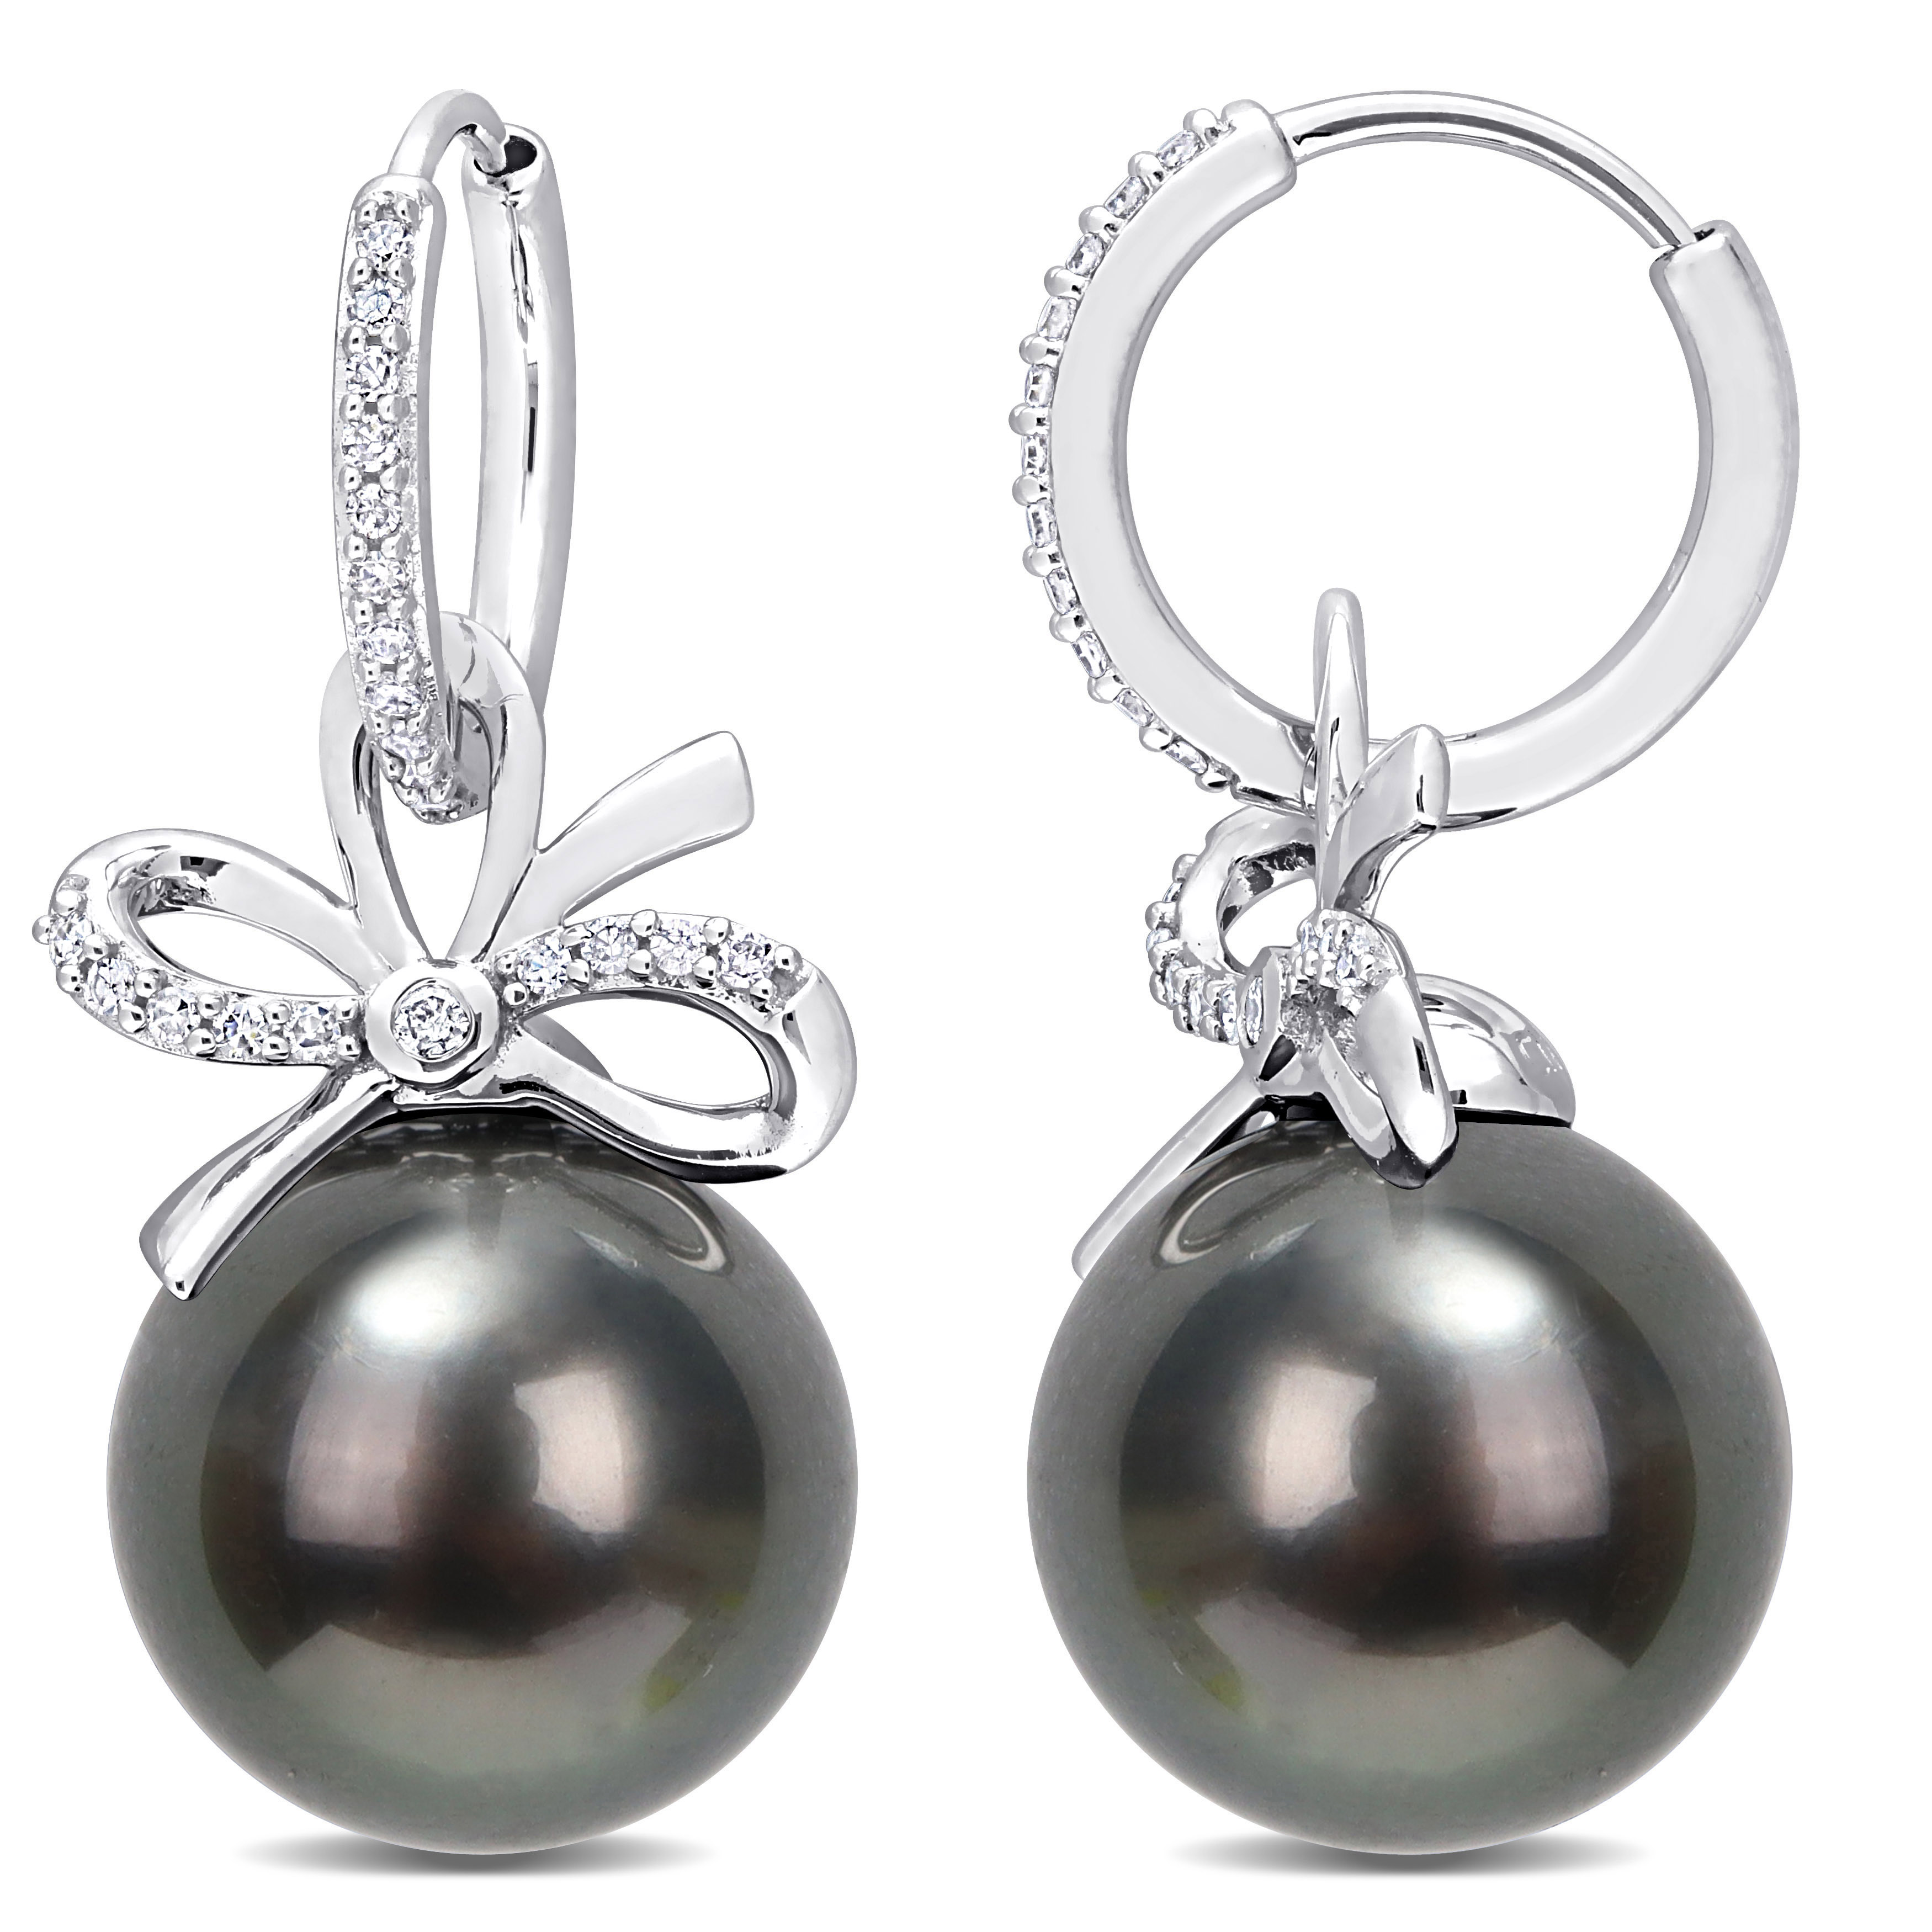 12-12.5 MM Black Tahitian Cultured Pearl and 1/4 CT TW Diamond Bow Huggie Earrings in 14k White Gold